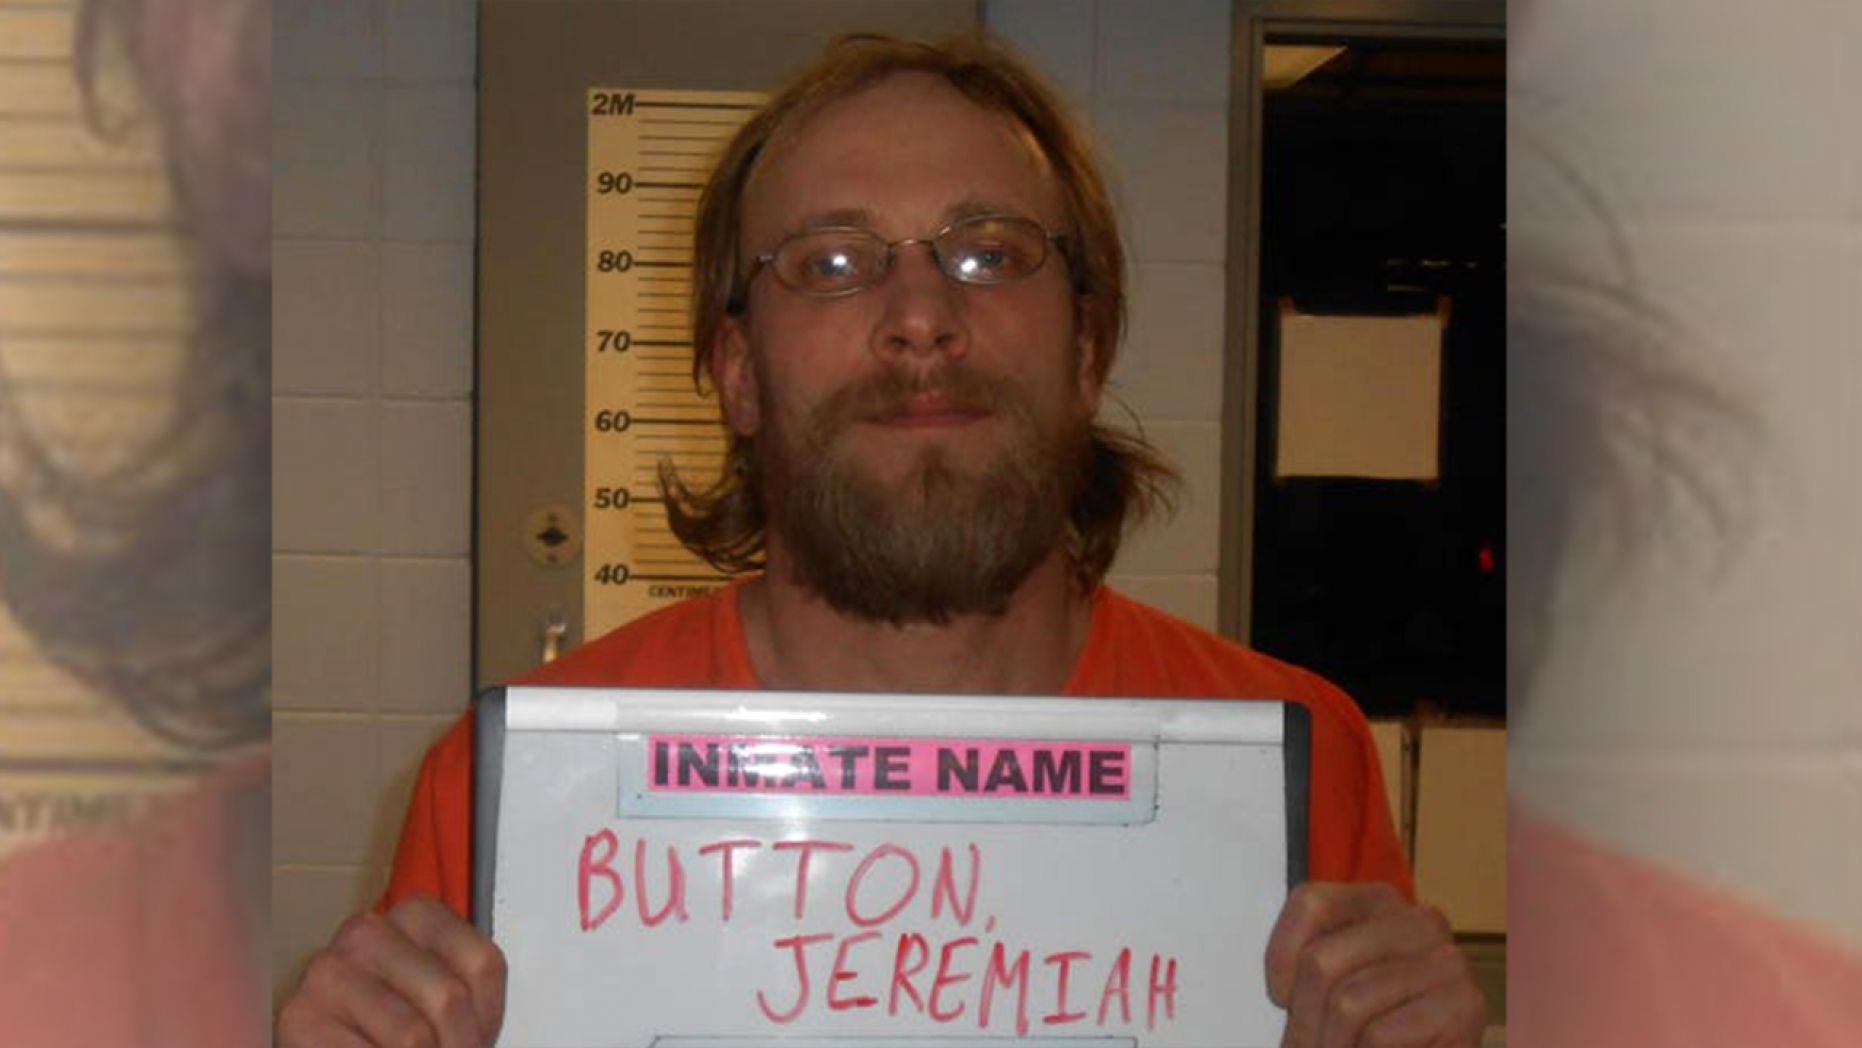 Jeremiah Button was arrested Aug. 9 after he was discovered living in a bunker in the Wisconsin woods for over three years, 